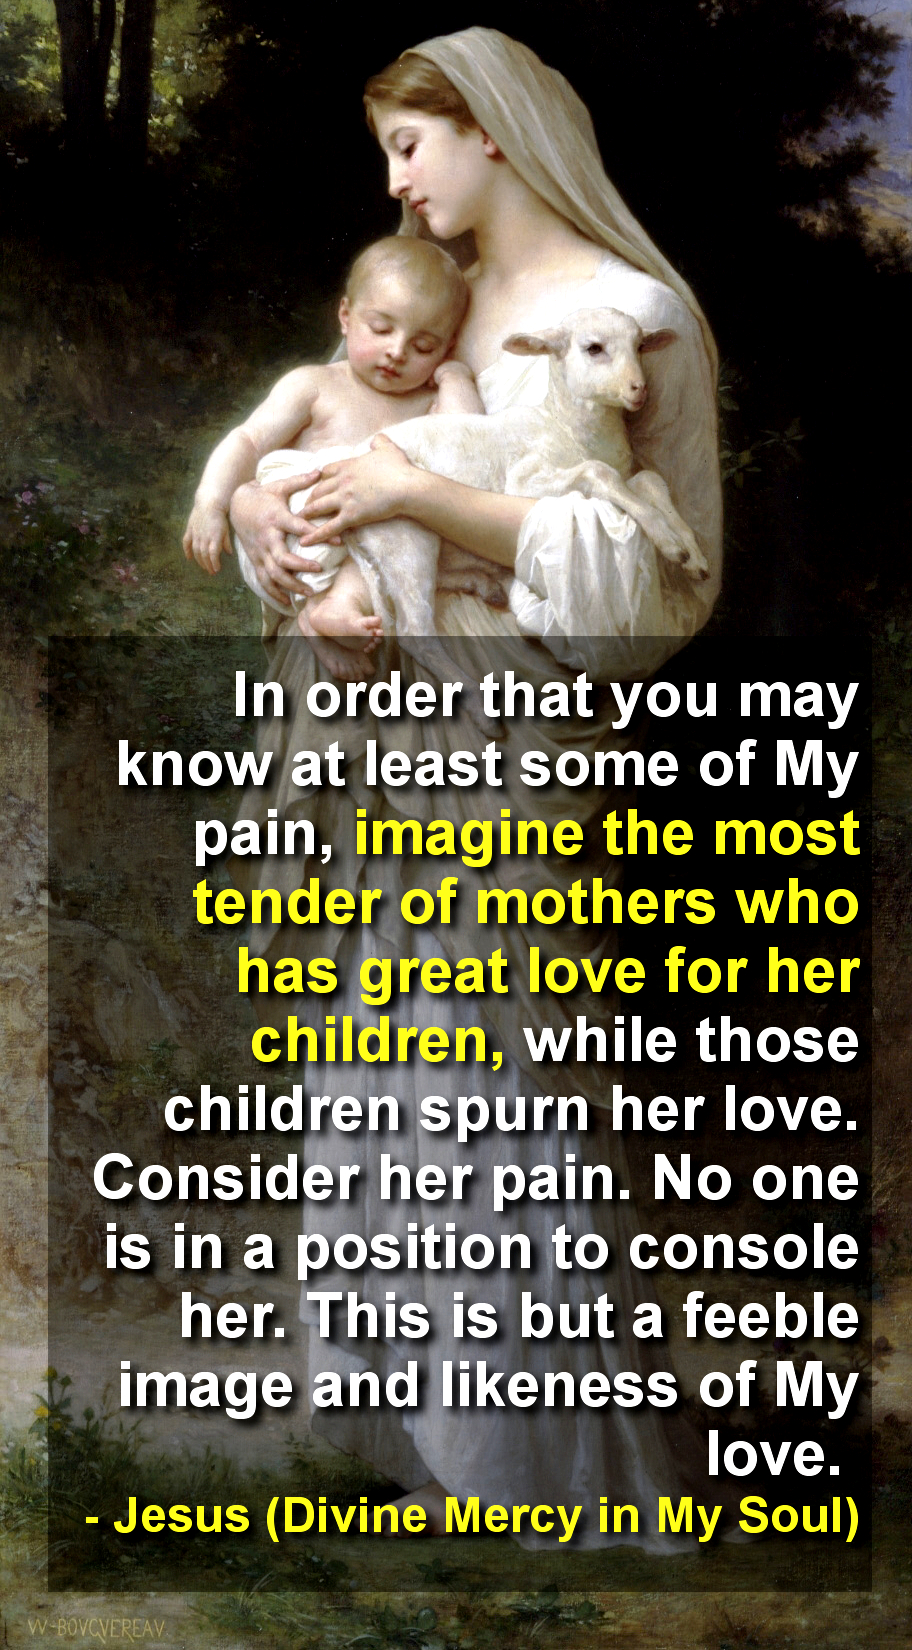 Like a Mother's Love - Quotes, Poems, Prayers, Books and ...